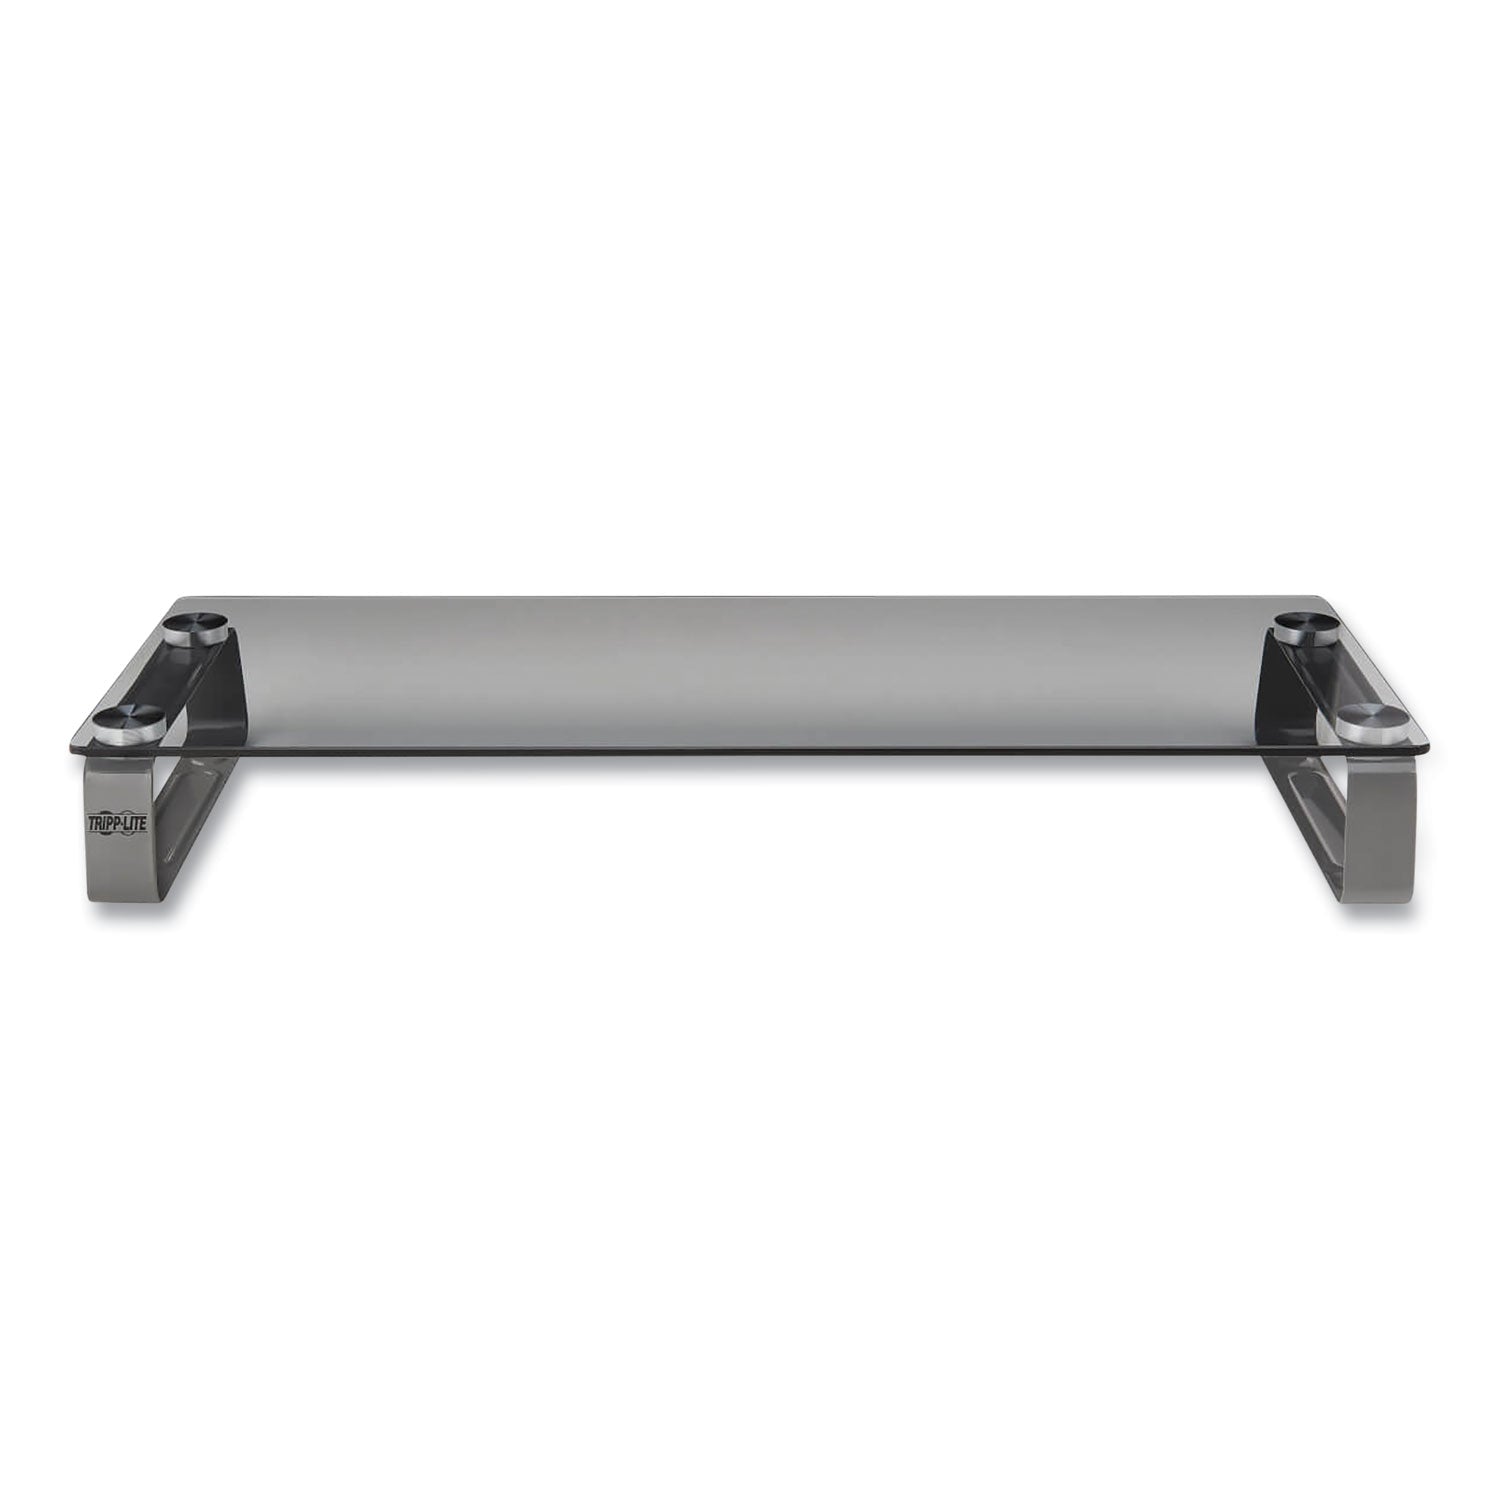 universal-glass-top-monitor-riser-22-x-8-x-3-clear-supports-39-lbs_trpmr2208g - 3